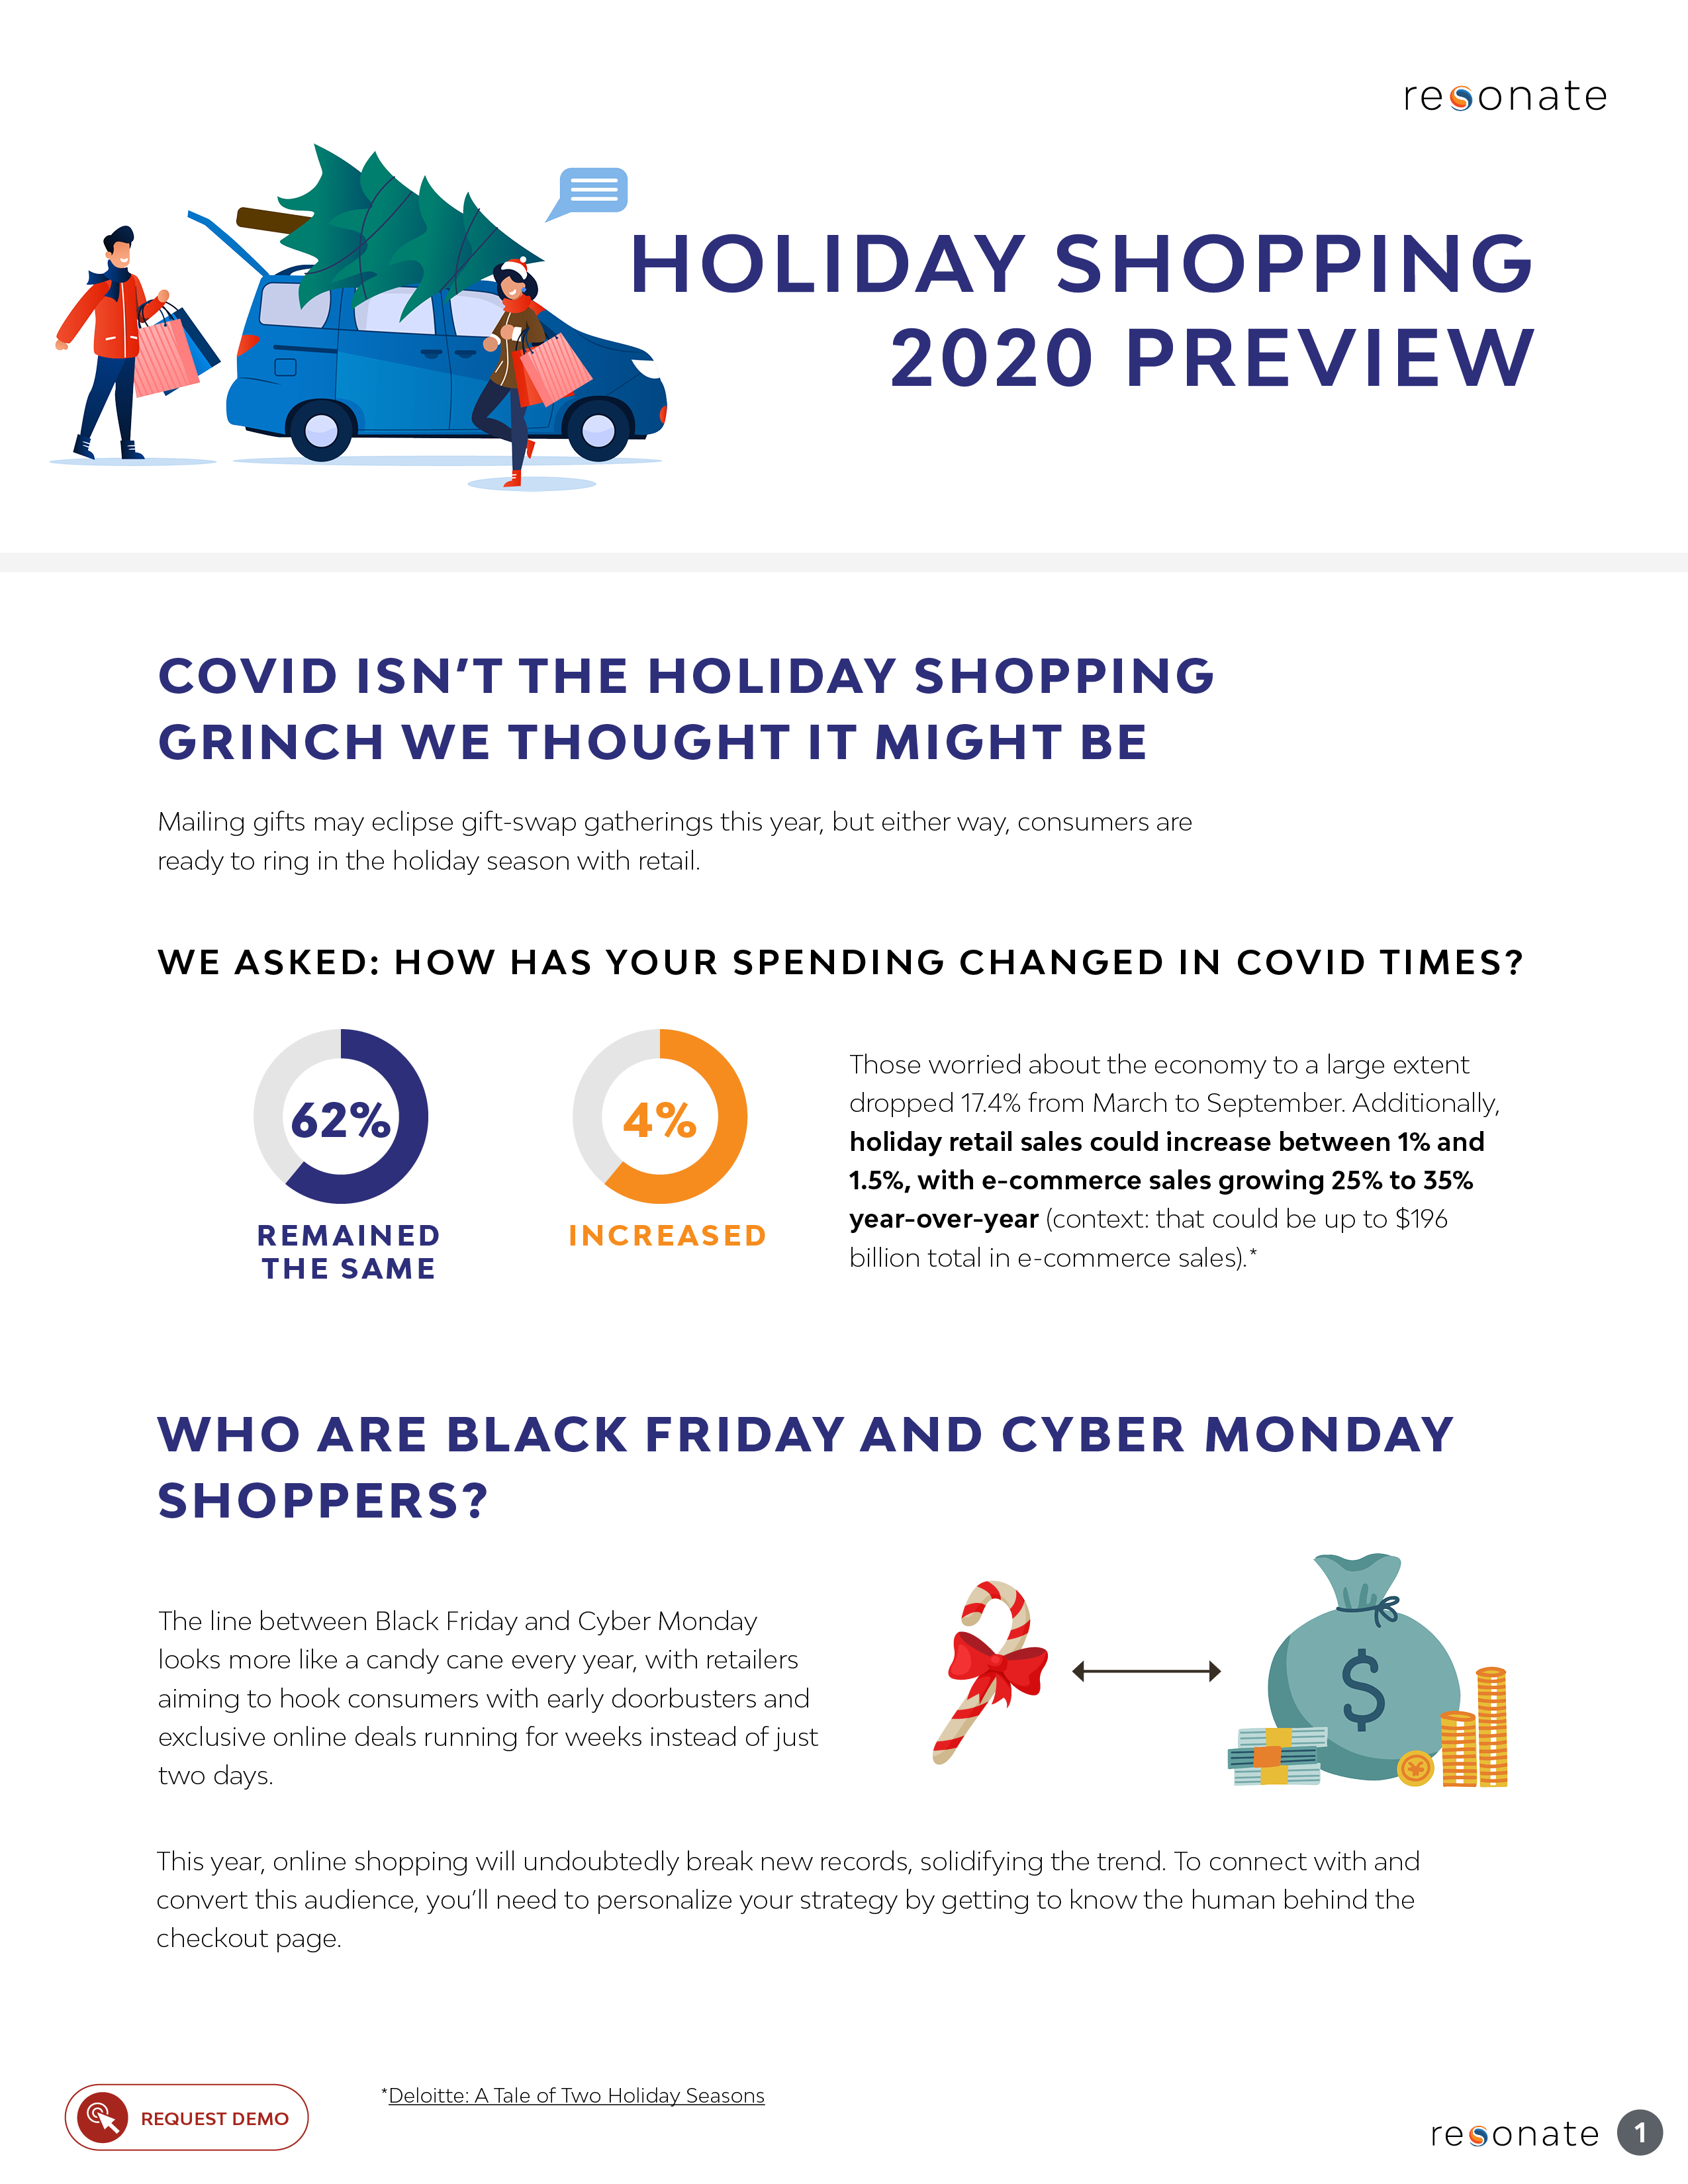 Holiday Shopping 2020 Preview